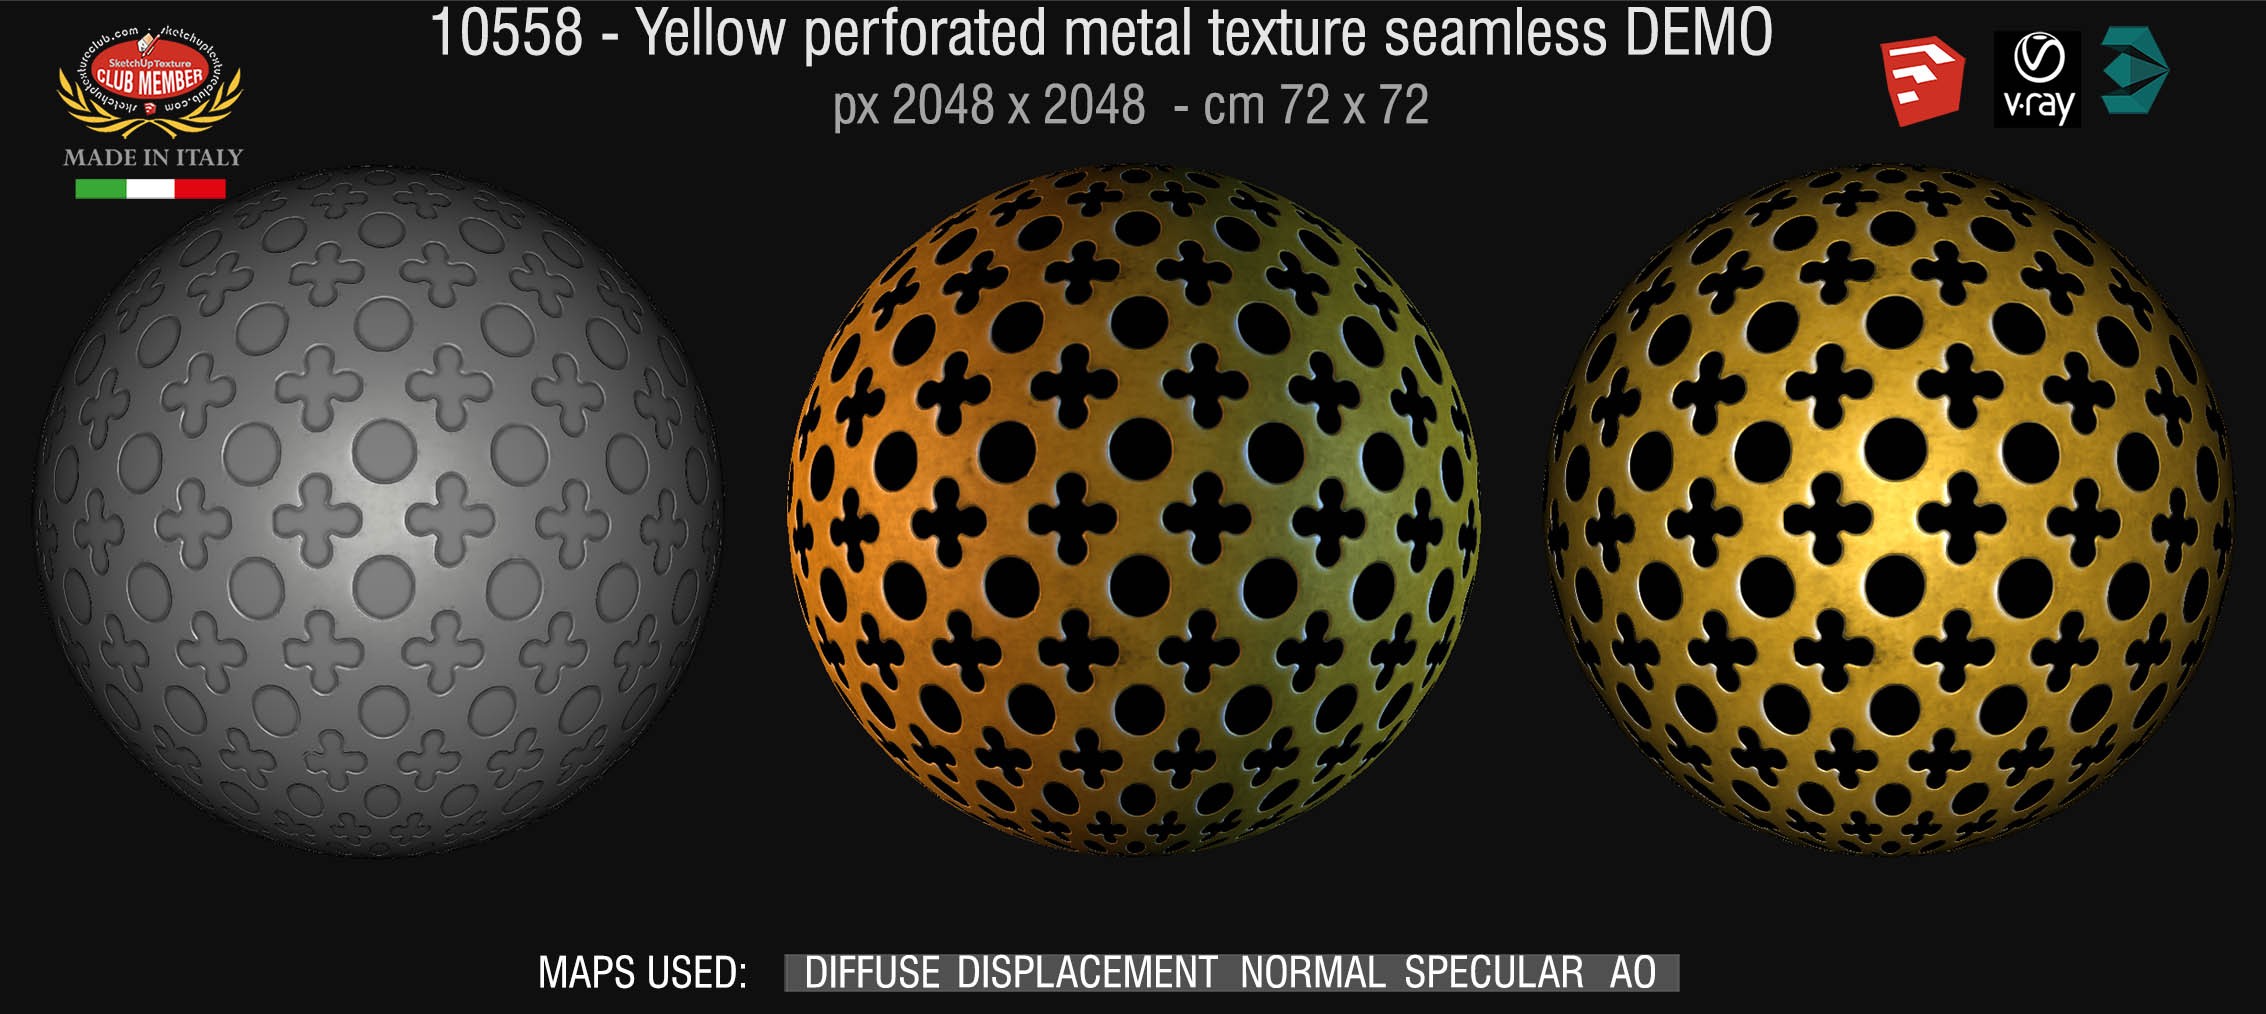 10558 HR Yellow perforated metal texture seamless + maps DEMO